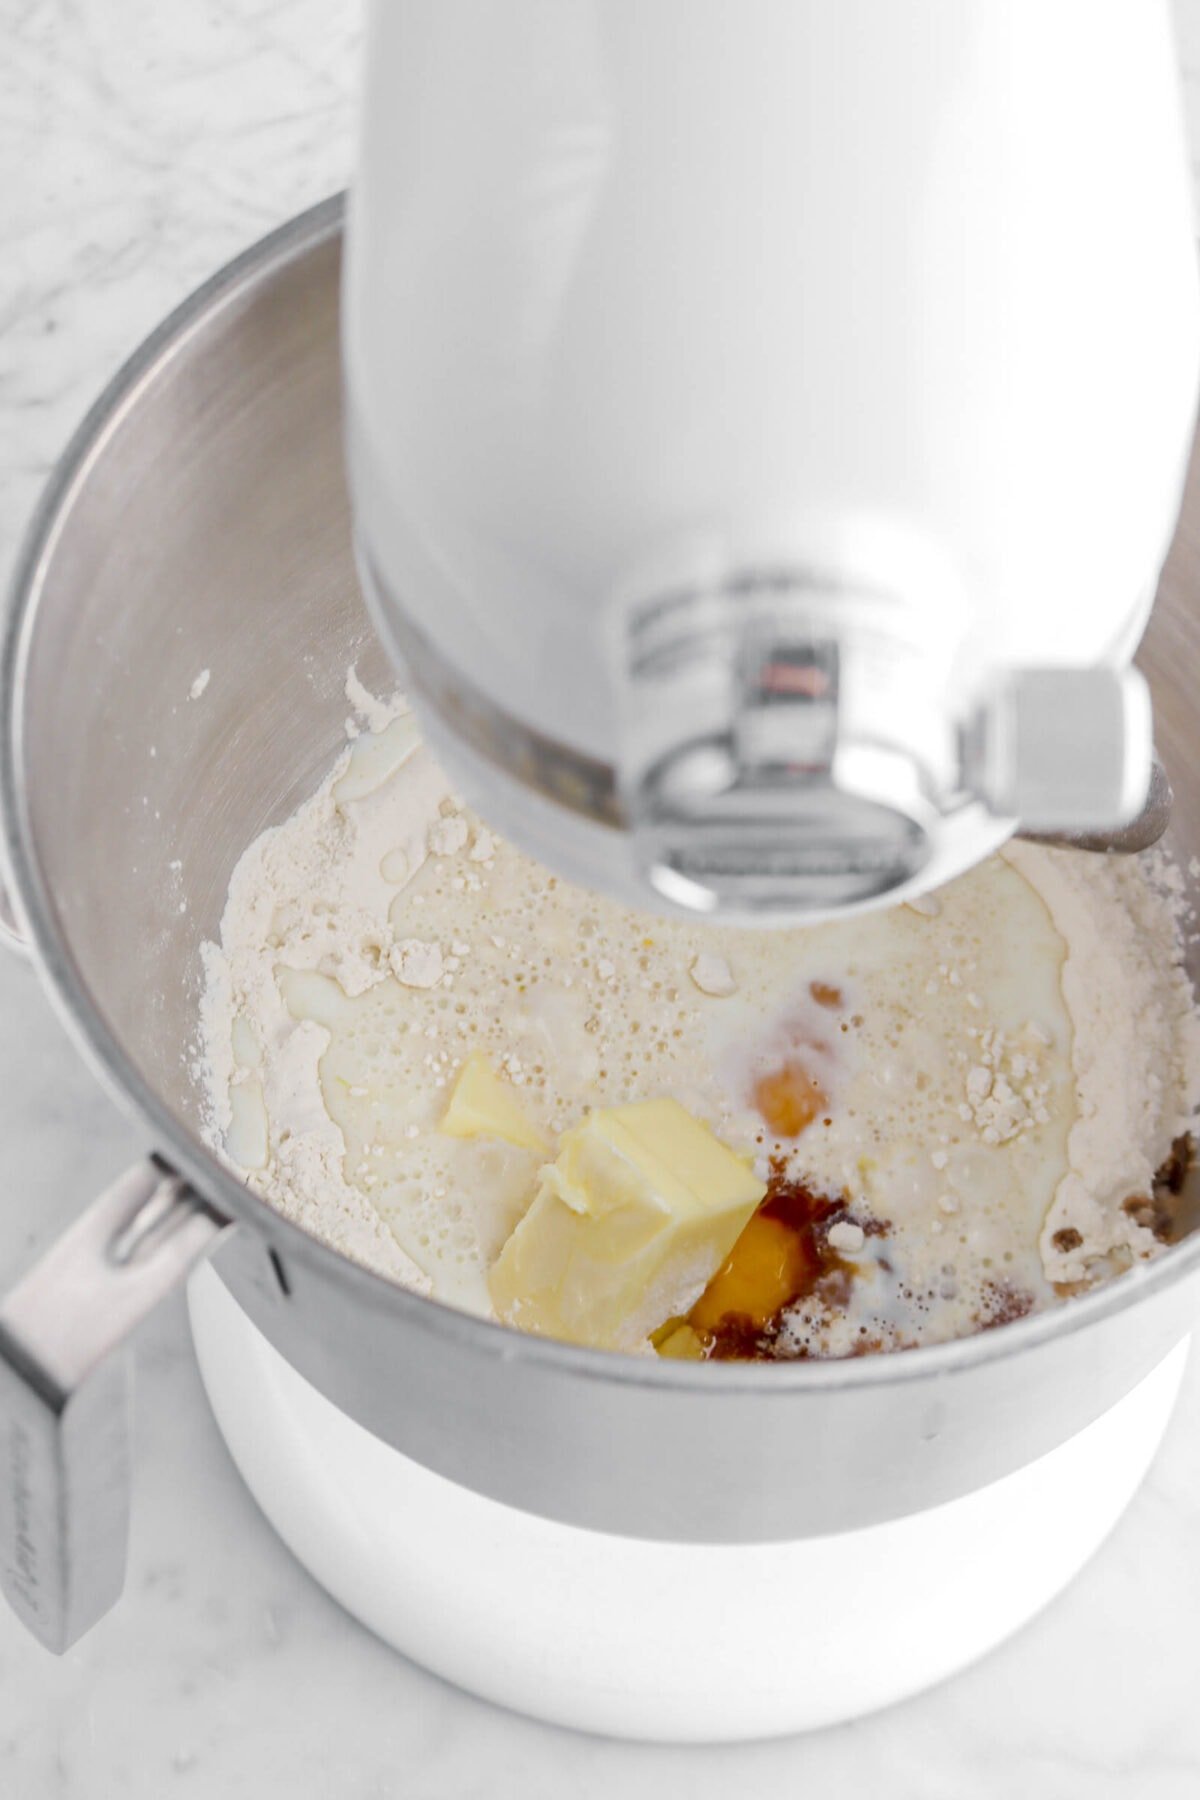 butter, eggs, vanilla, and milk added to dry ingredients.